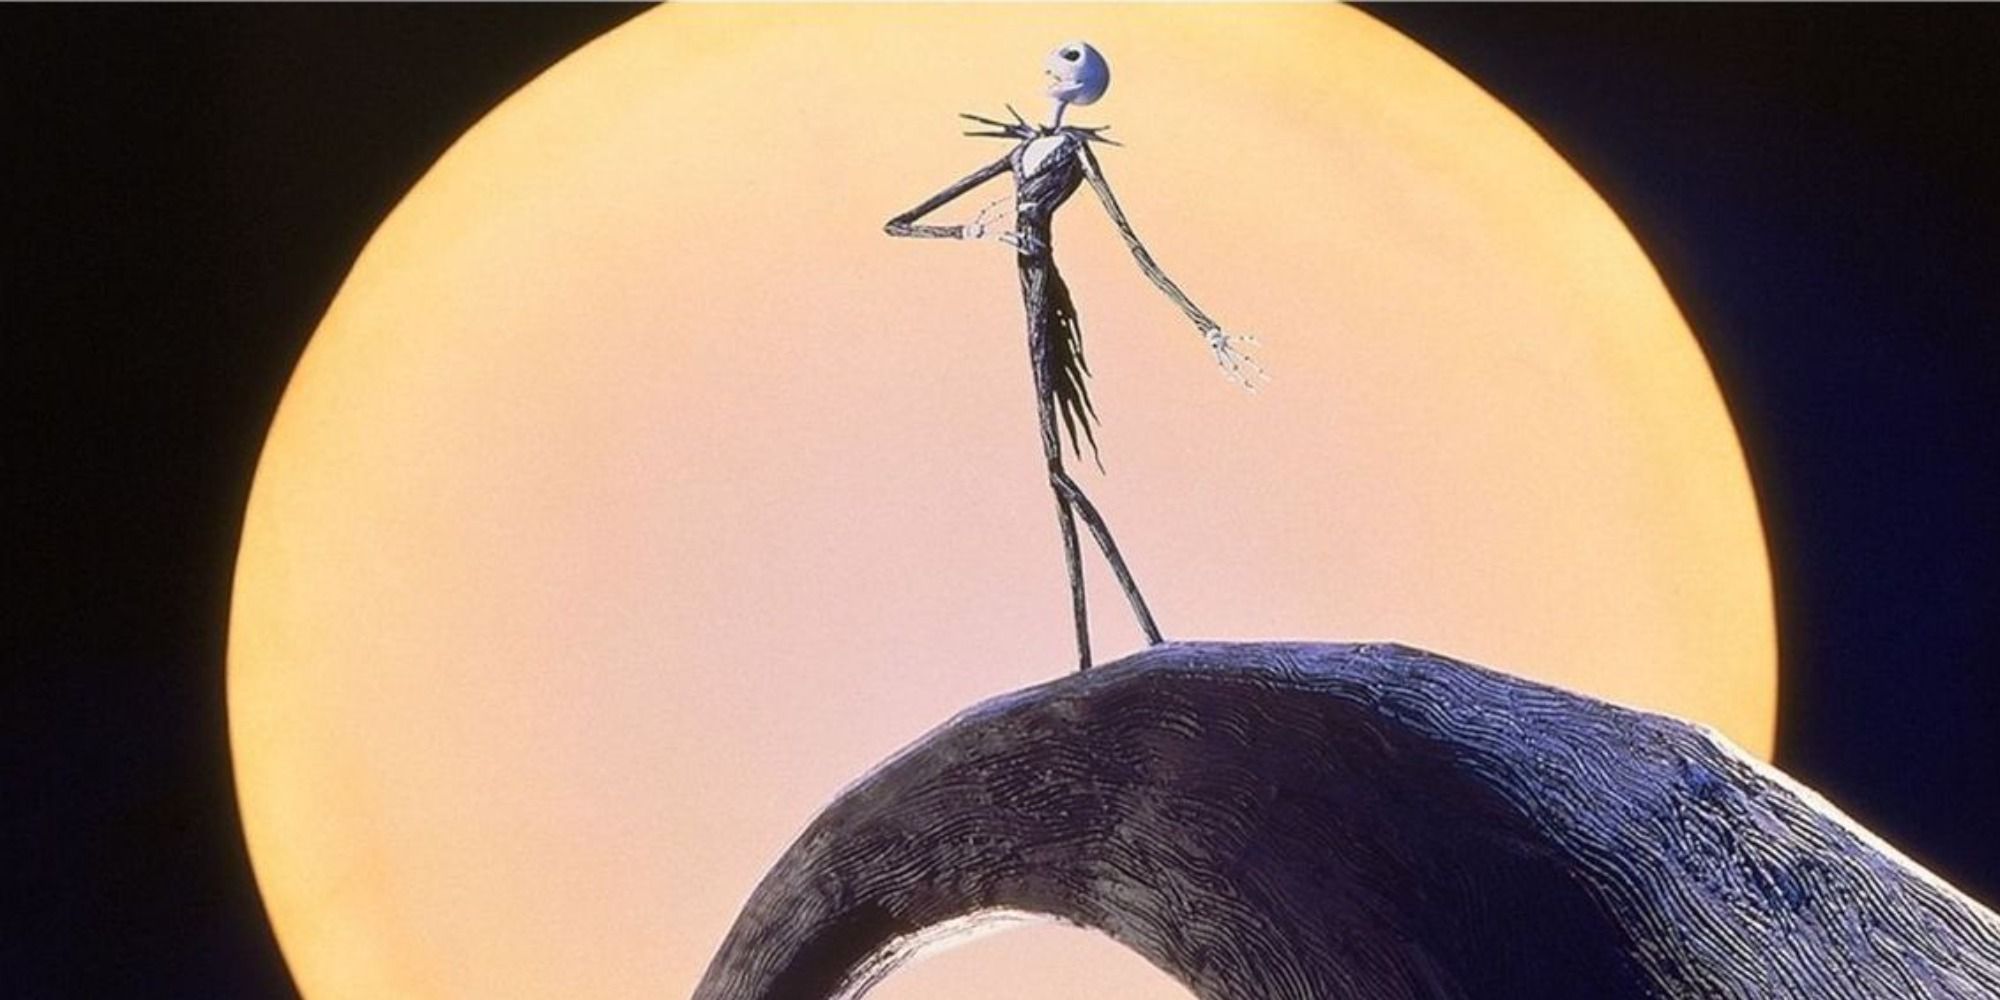 Jack Skellington on a hill silhouetted by the moon in The Nightmare Before Christmas